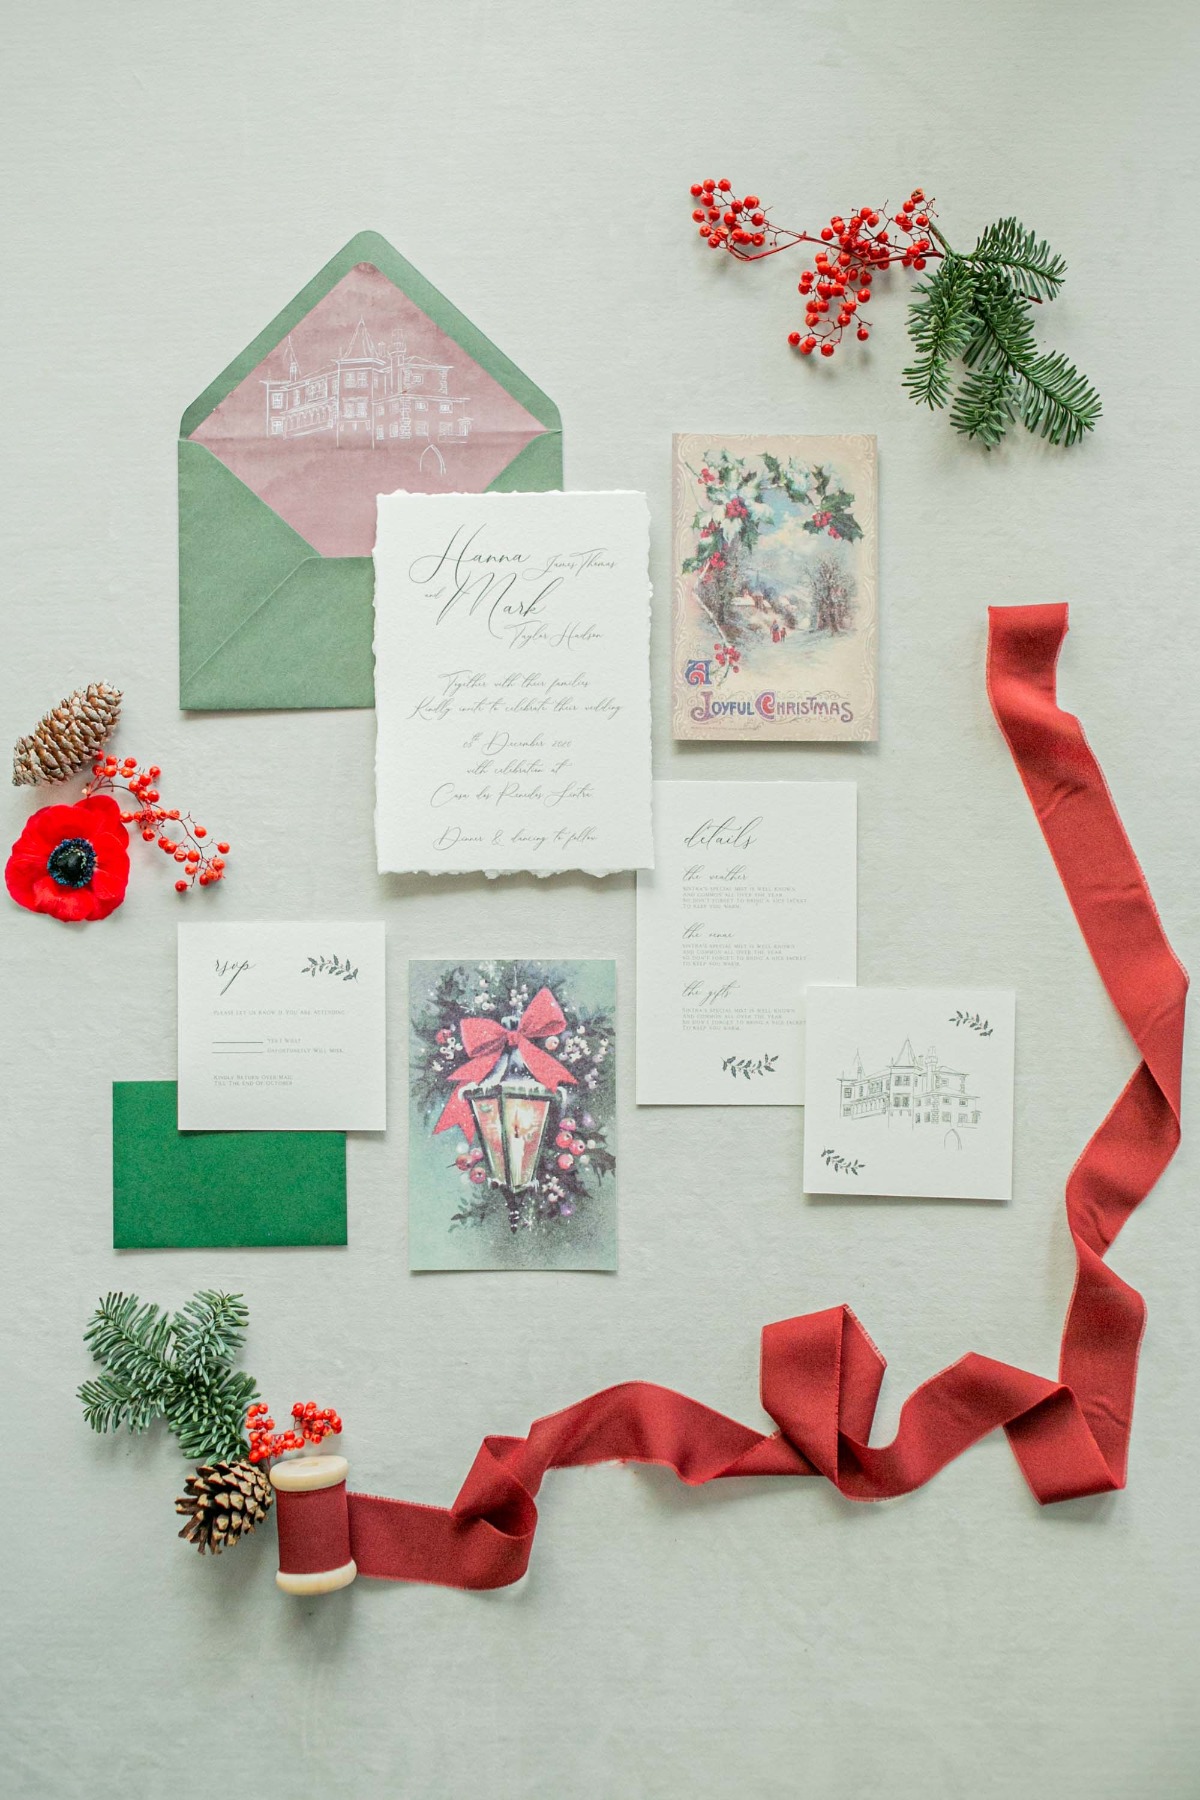 A Portugal Winter Wedding Inspiration Full Of Bright Bold Colors